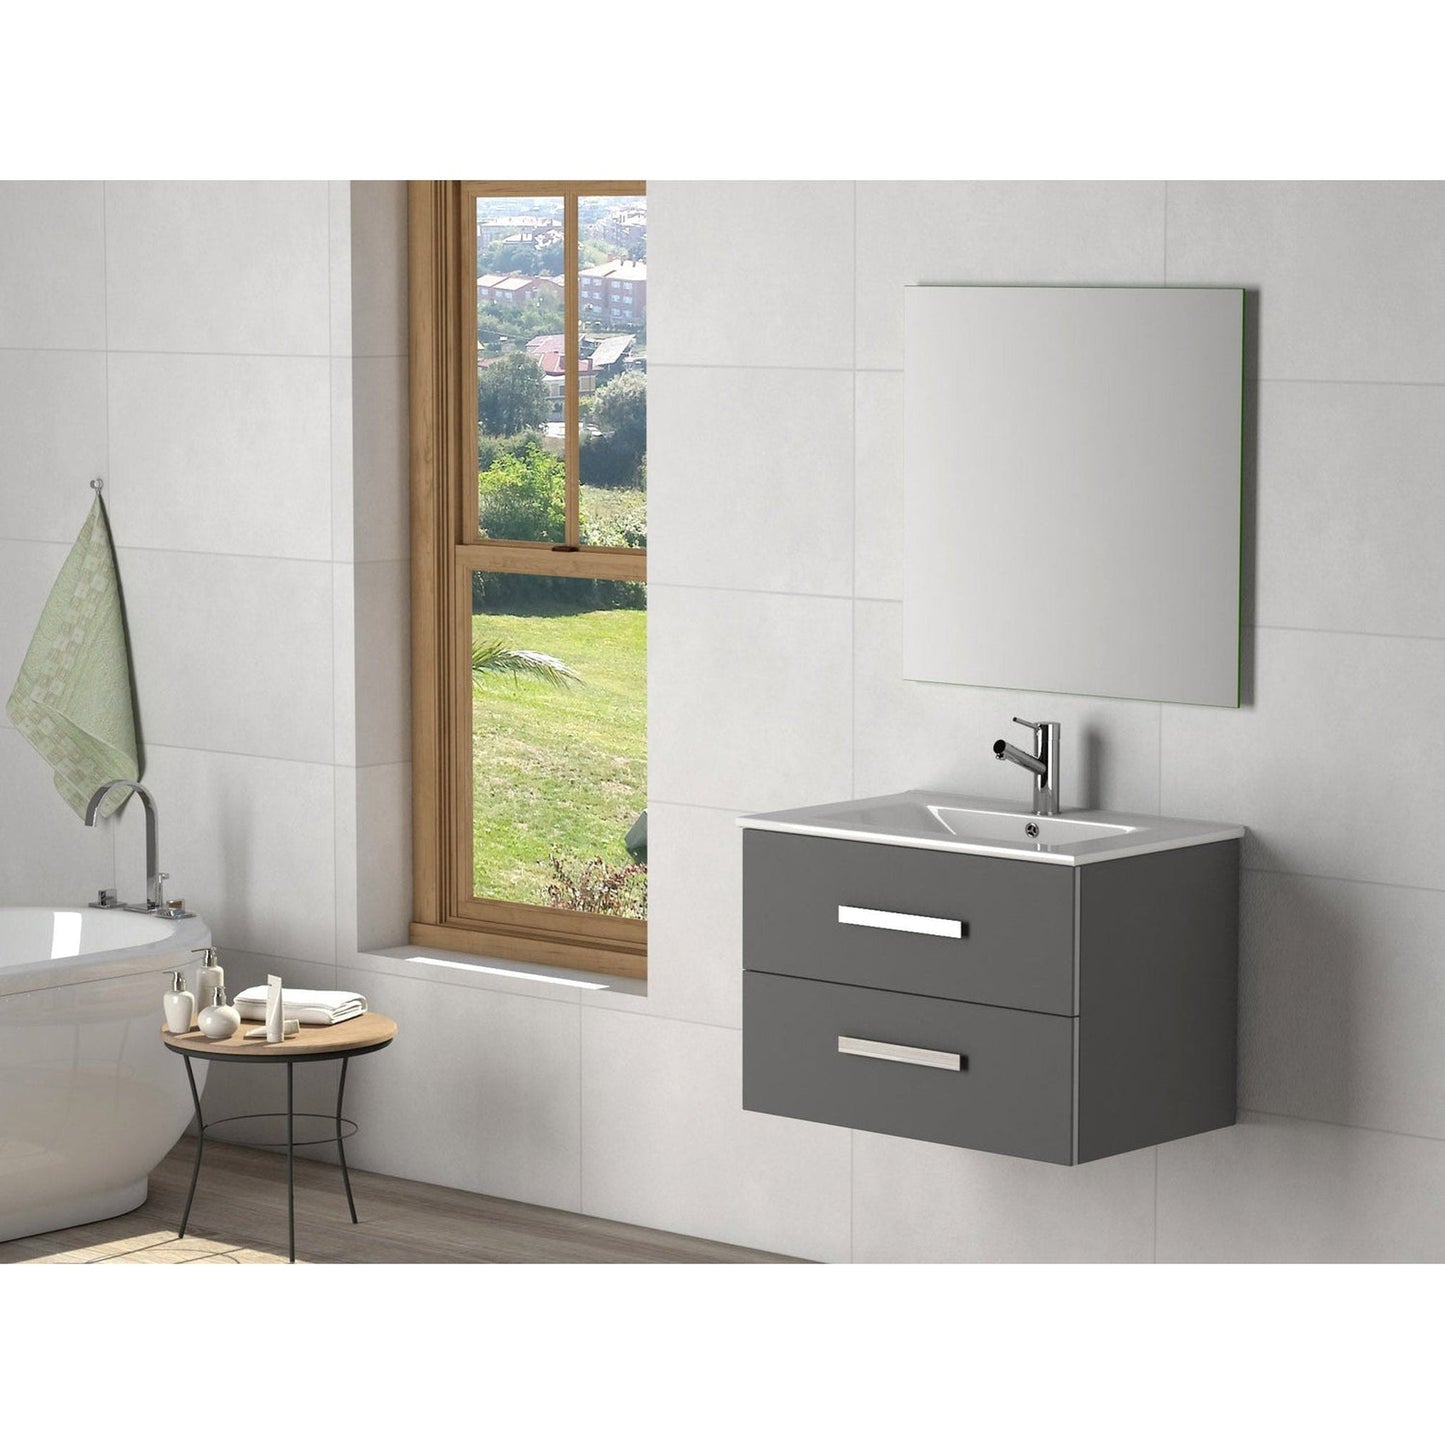 Eviva Astoria 28” x 25” Gray Wall-Mounted Bathroom Vanity With White Integrated Porcelain Sink